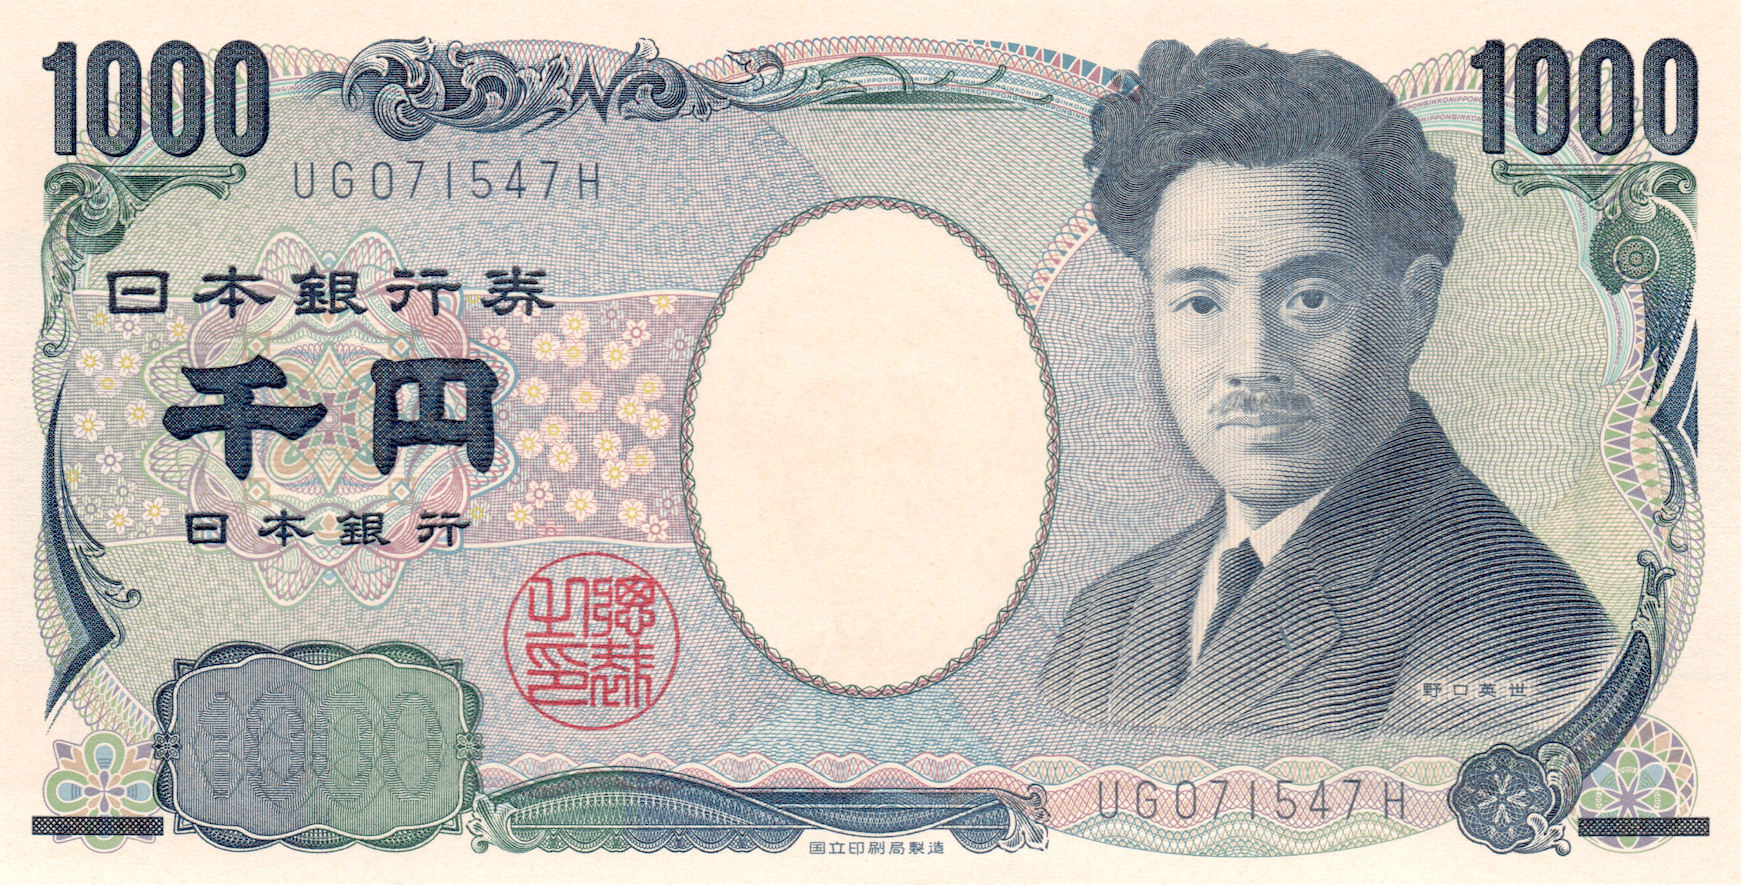 A 1000 Japanese yen (US$ 7.74) note. Photo by Nepali Times. Used with permission.